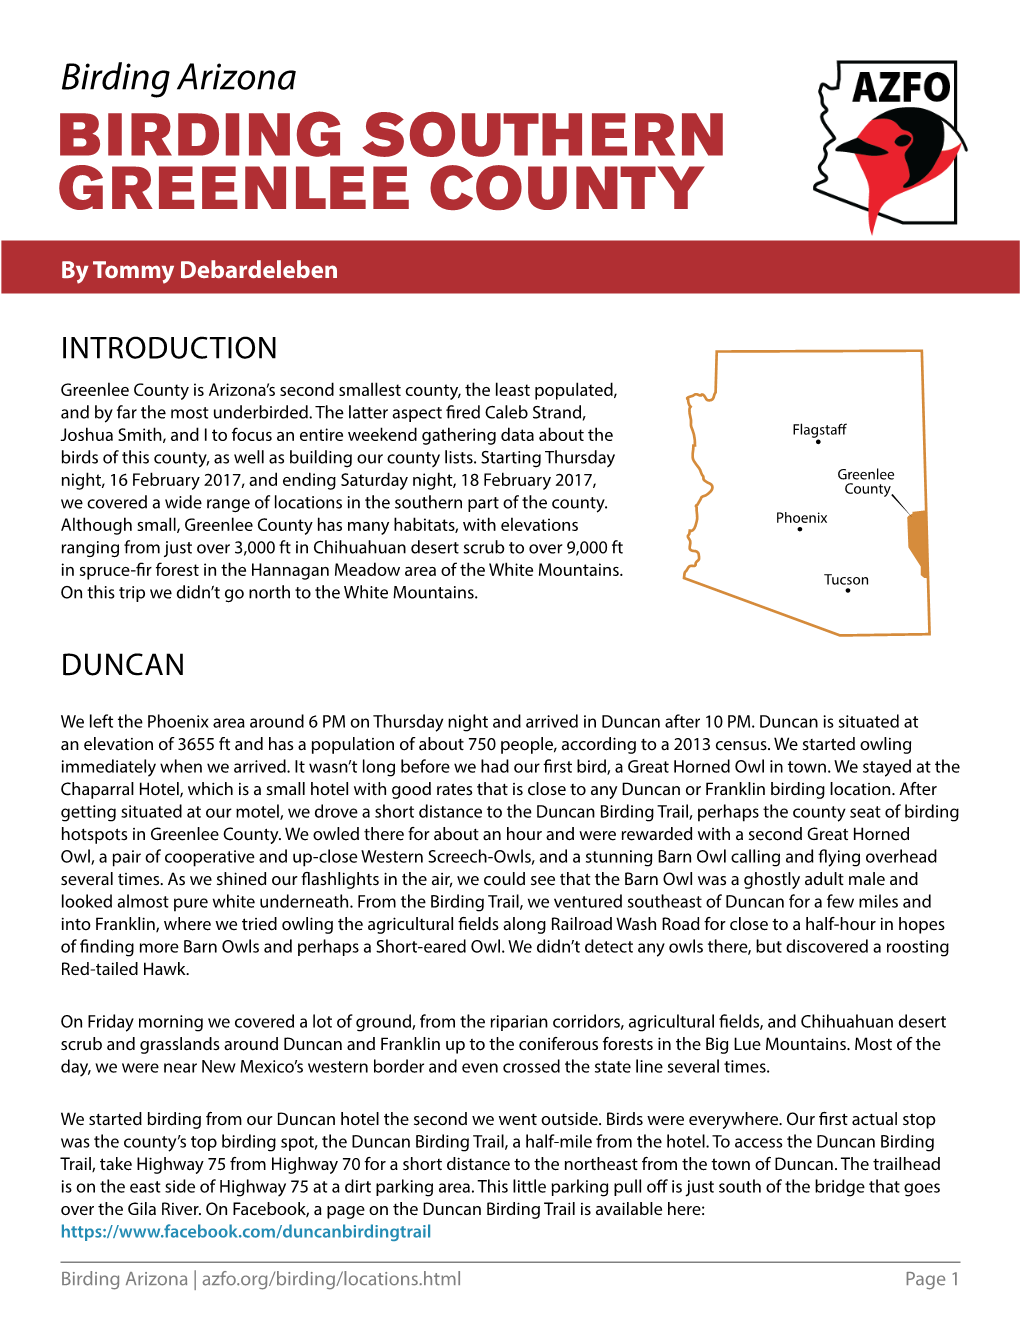 Greenlee County